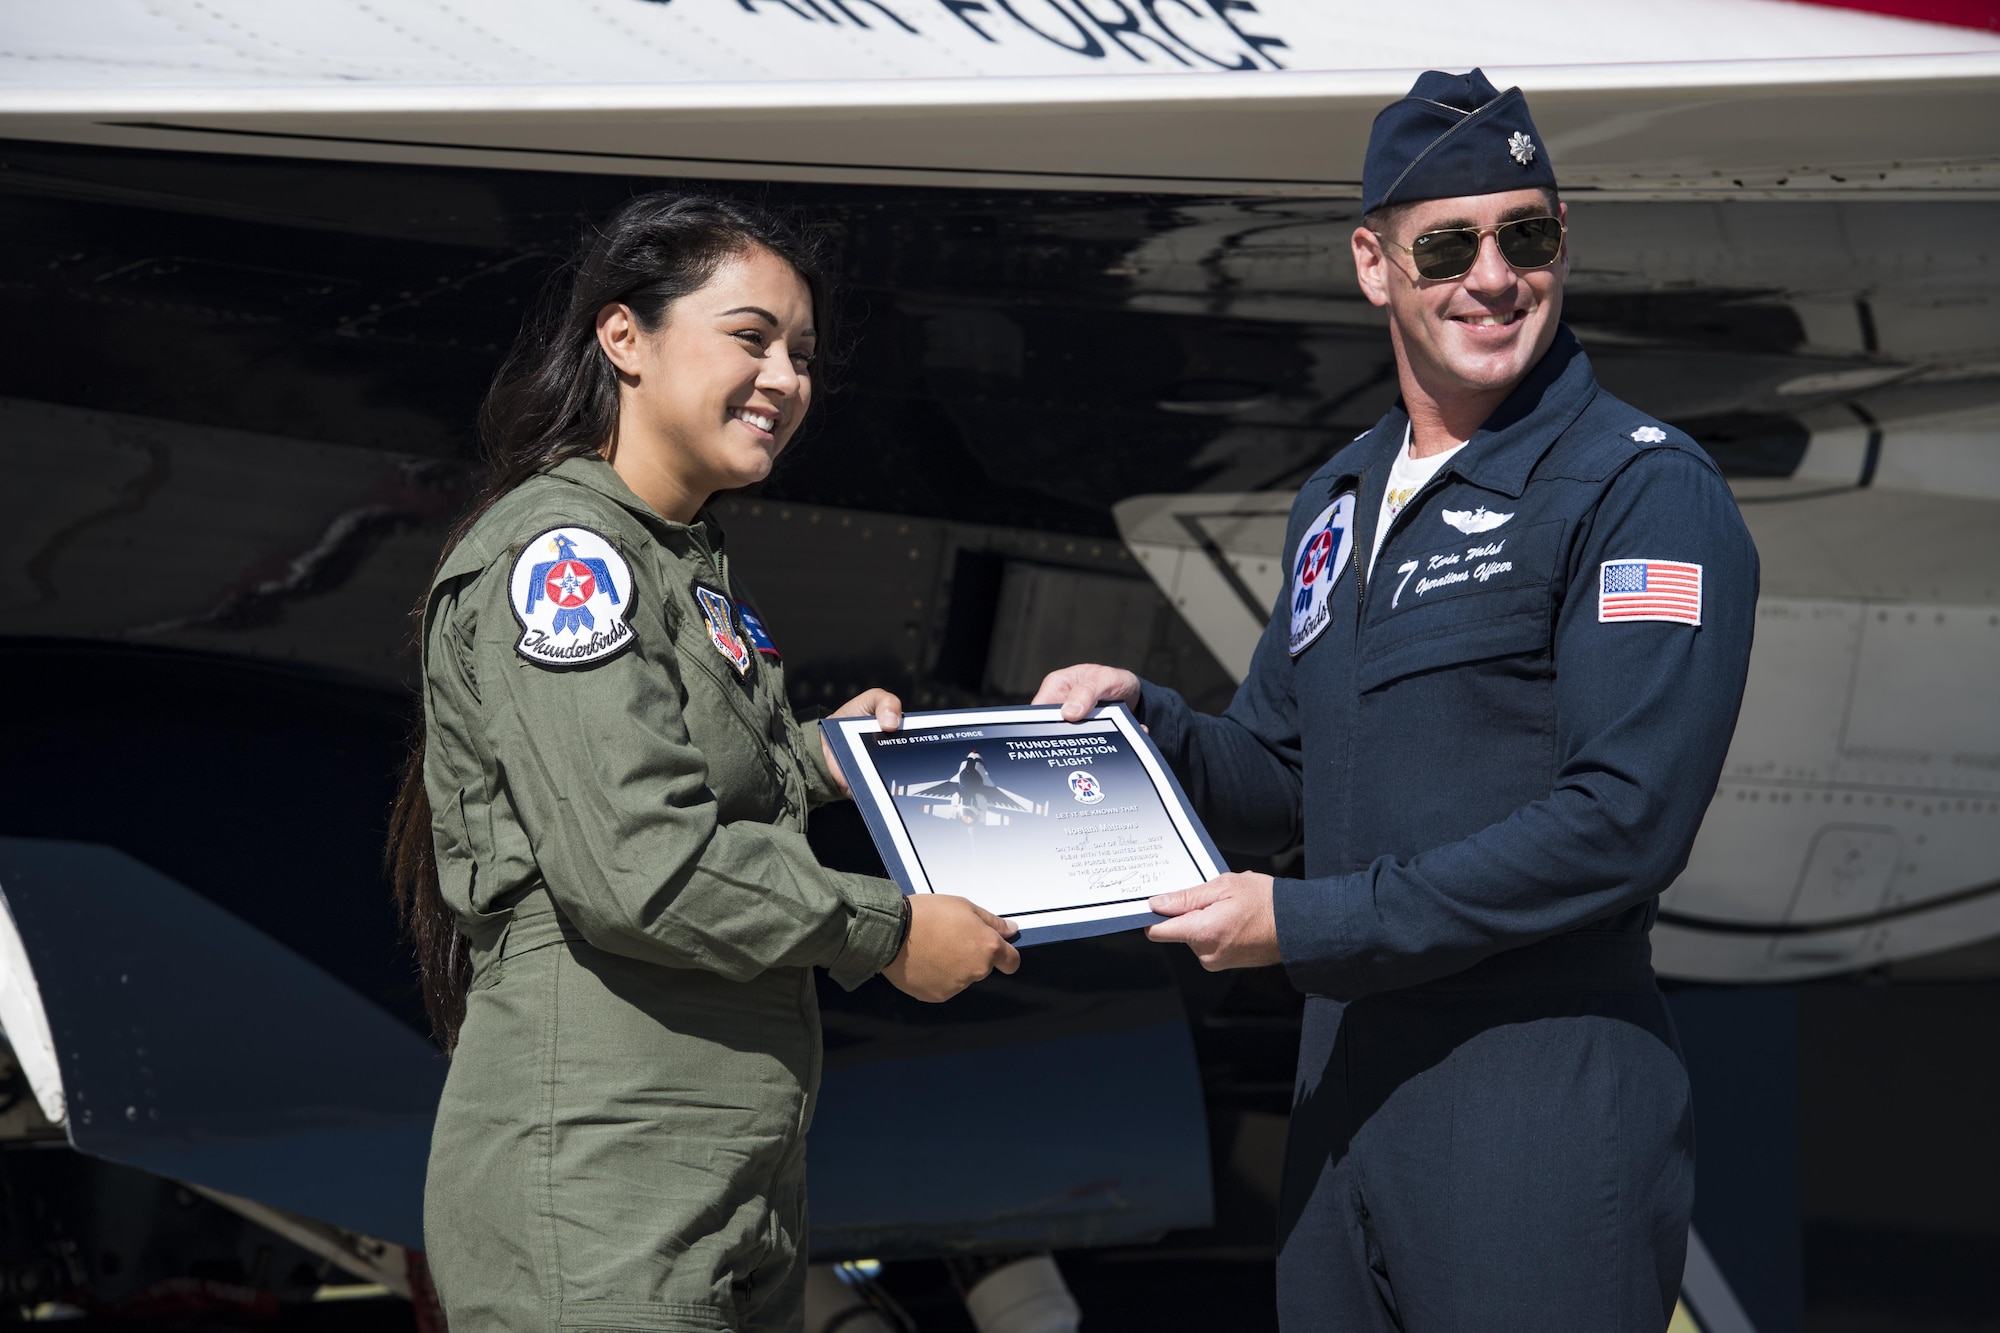 Noelani Mathews, multimedia journalist, and Lt. Col. Kevin Walsh, U.S. Air Force Thunderbird pilot No. 7, pose with her flight certificate after her media flight in an F-16D Fighting Falcon, Oct. 27, 2017, at Moody Air Force Base, Ga. The Thunderbirds, based out of Nellis Air Force Base, Nev., are the Air Force’s premier aerial demonstration team, performing at air shows and special events worldwide. (U.S. Air Force photo by Senior Airman Janiqua P. Robinson)